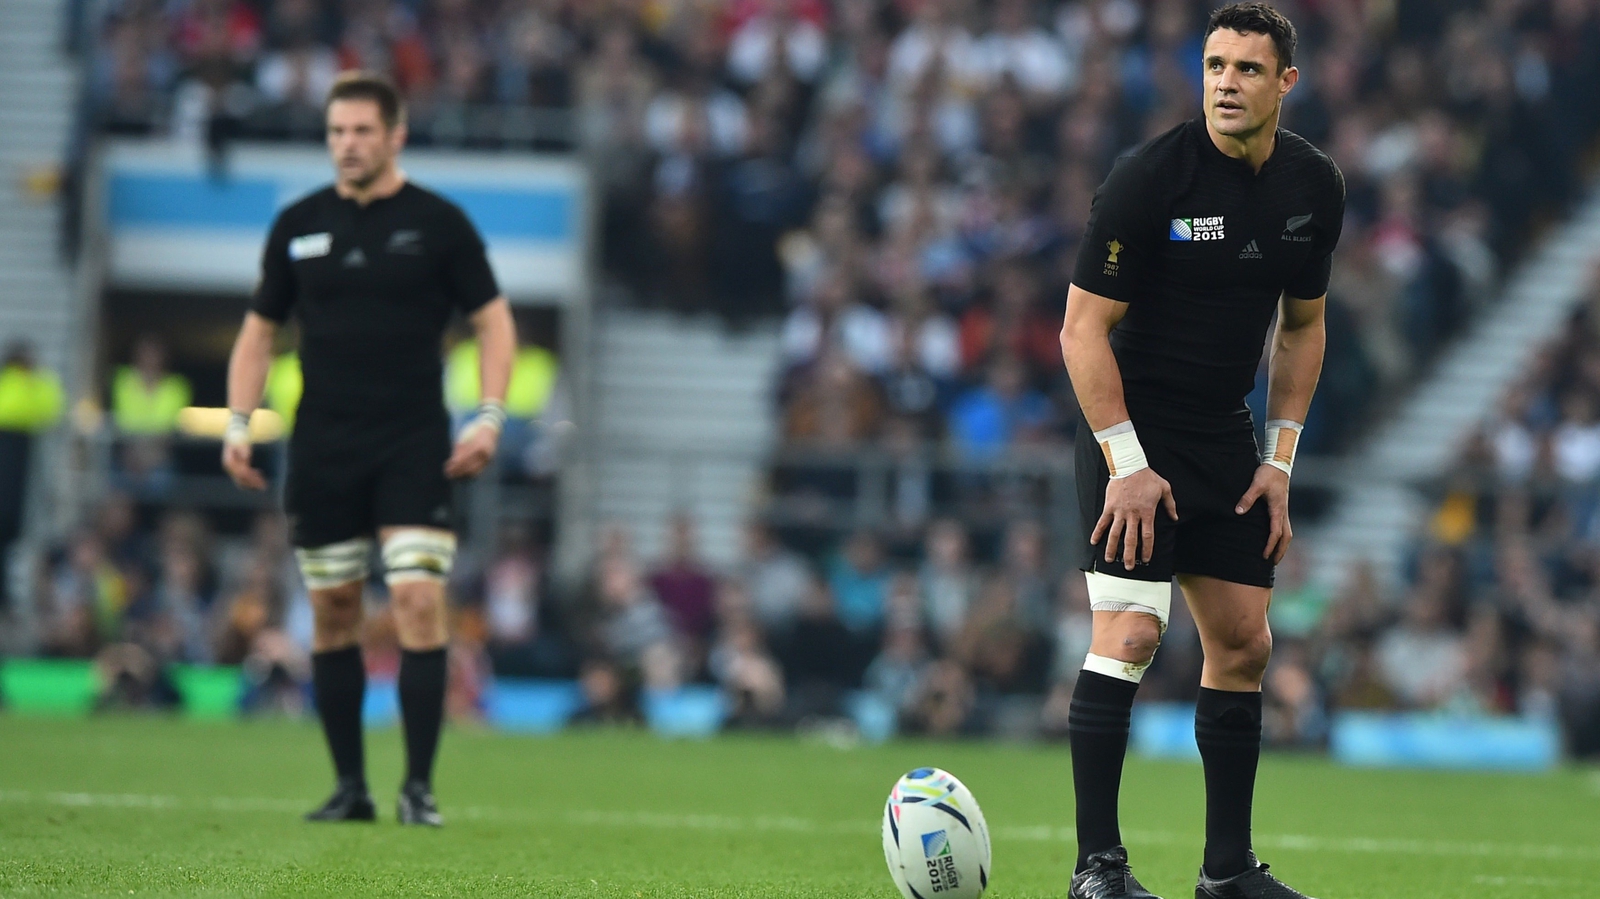 Rugby World Cup final: Reaction to Dan Carter's kicking in man of